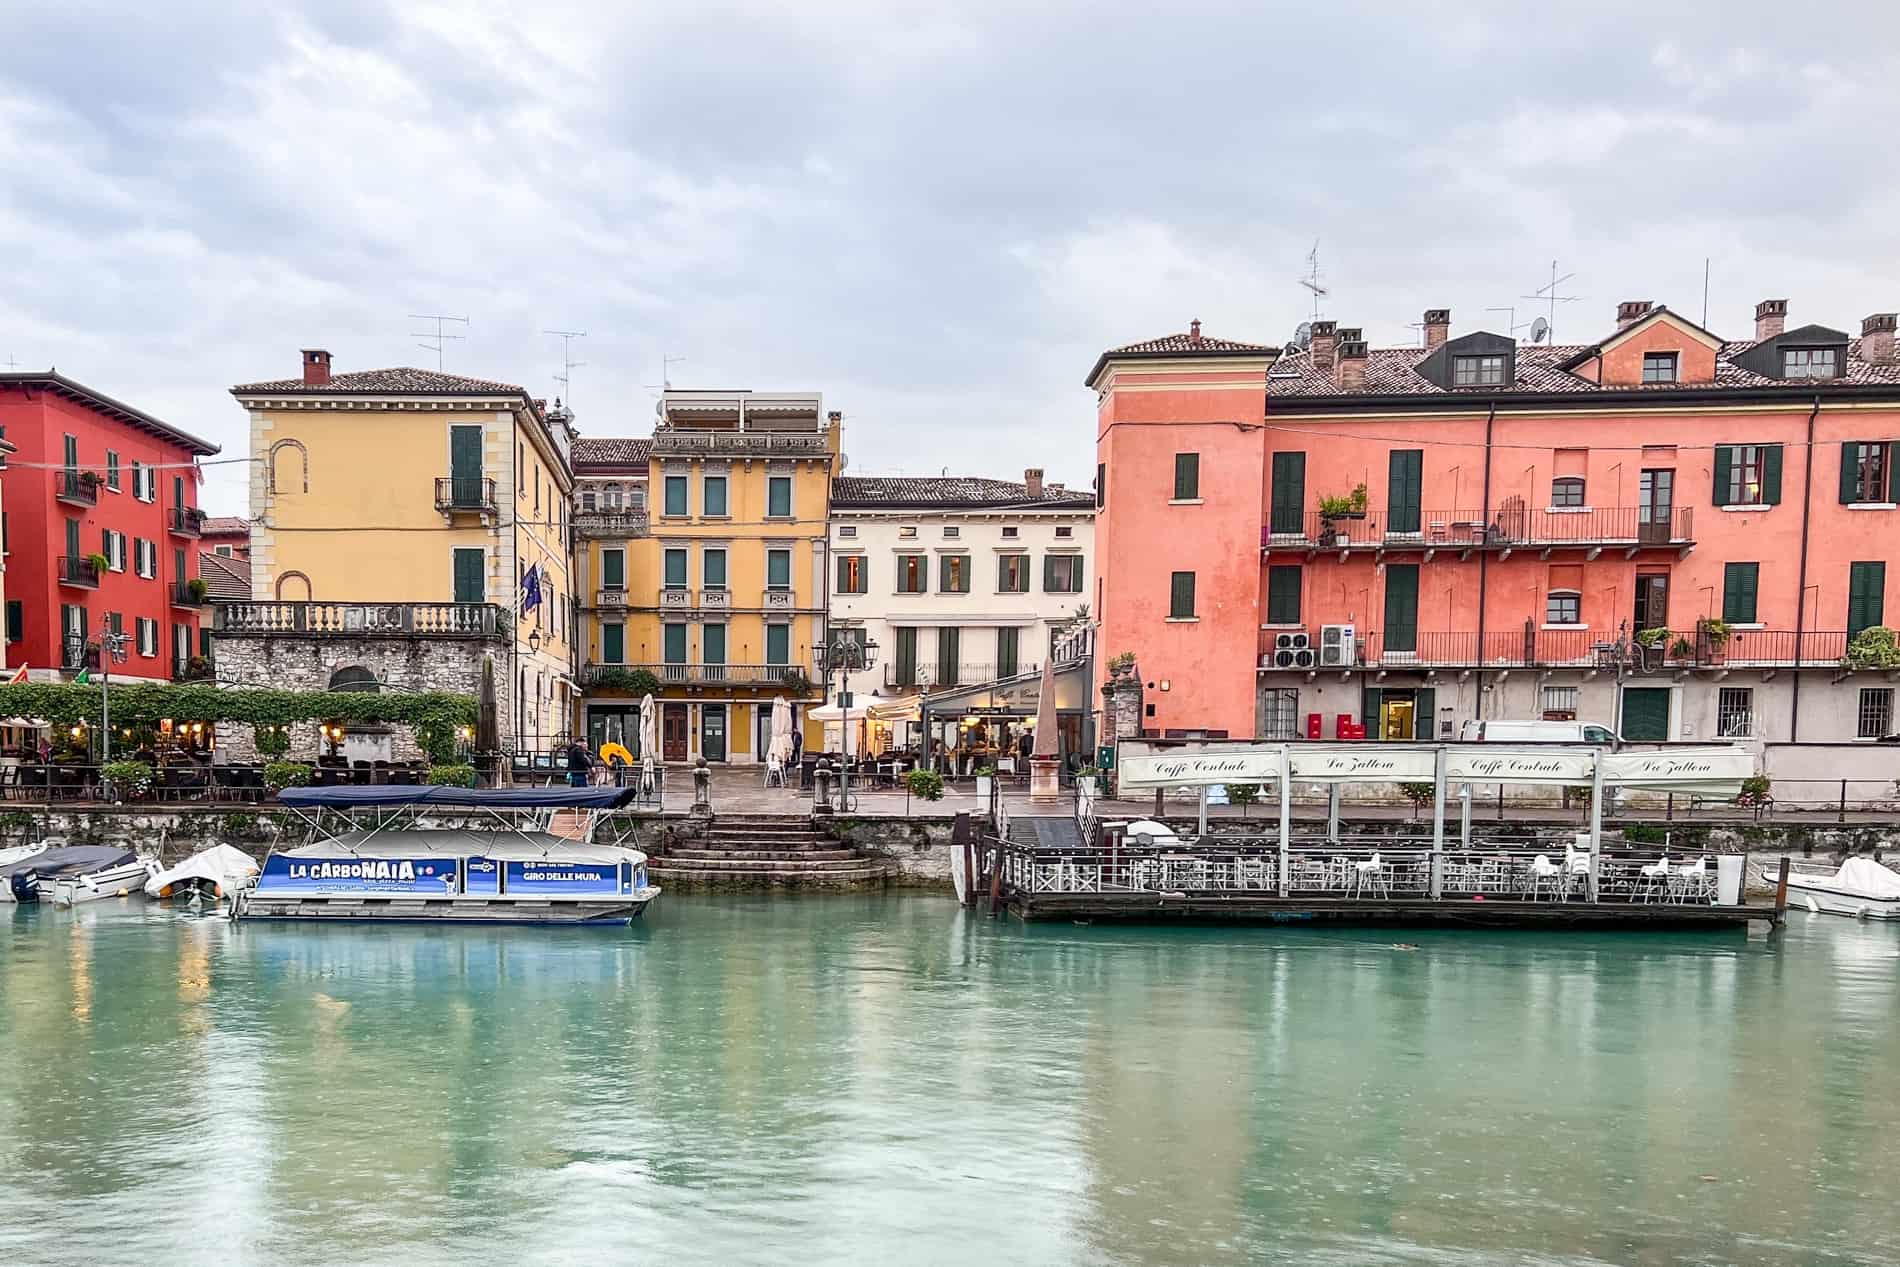 The turquoise canal of Peschiera del Garda lined with red, yellow, and pink buildings of the old town. 